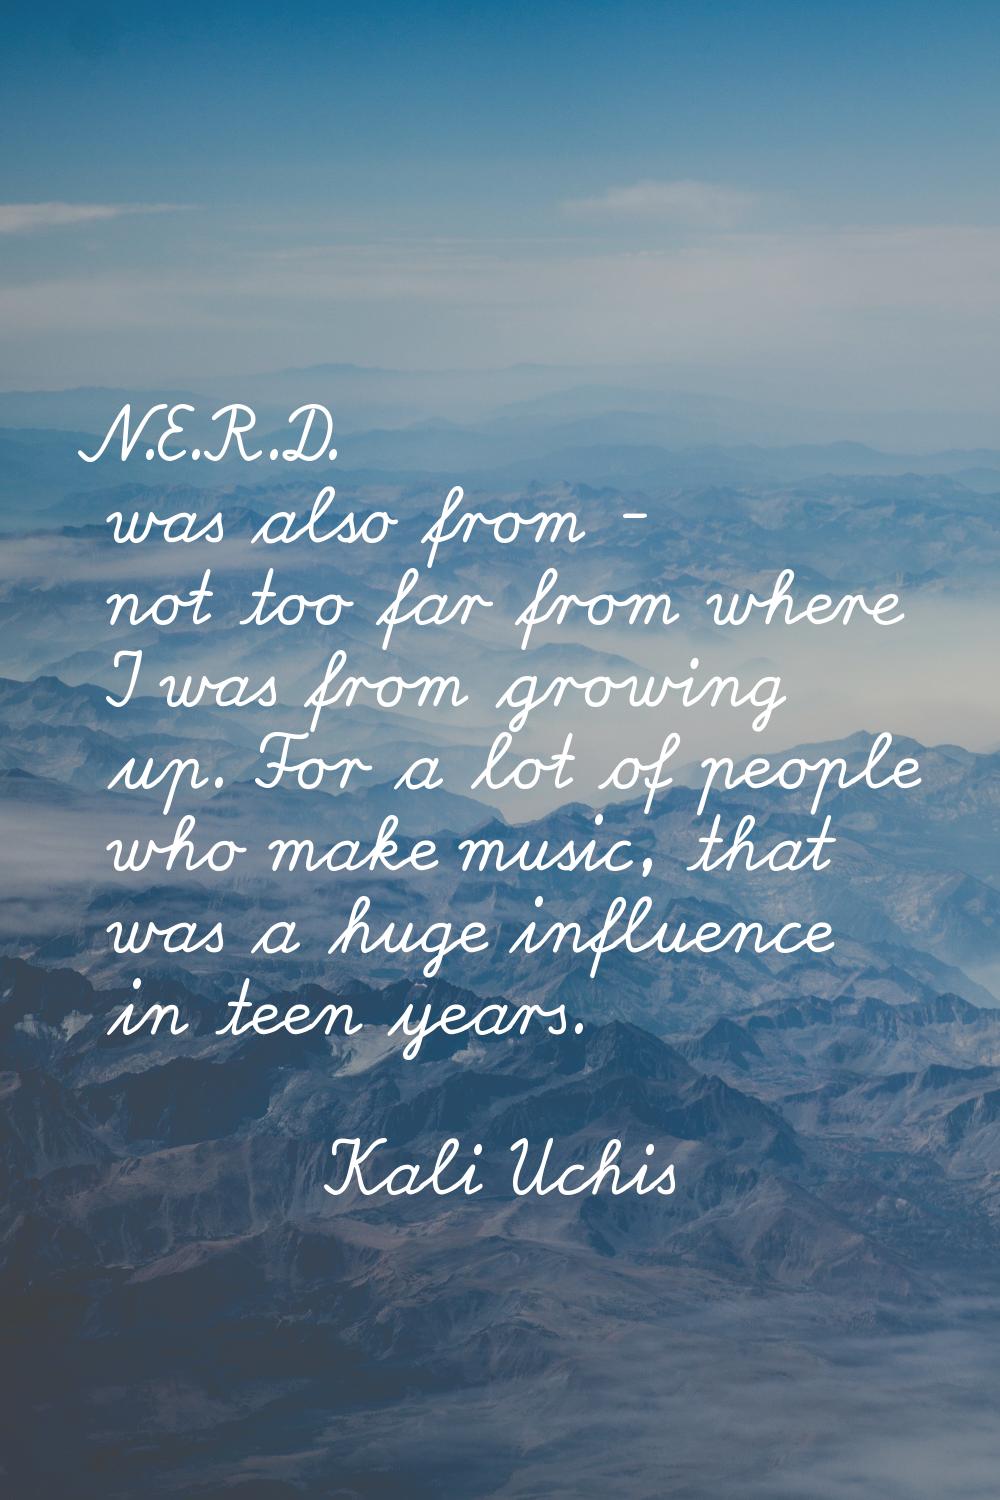 N.E.R.D. was also from - not too far from where I was from growing up. For a lot of people who make